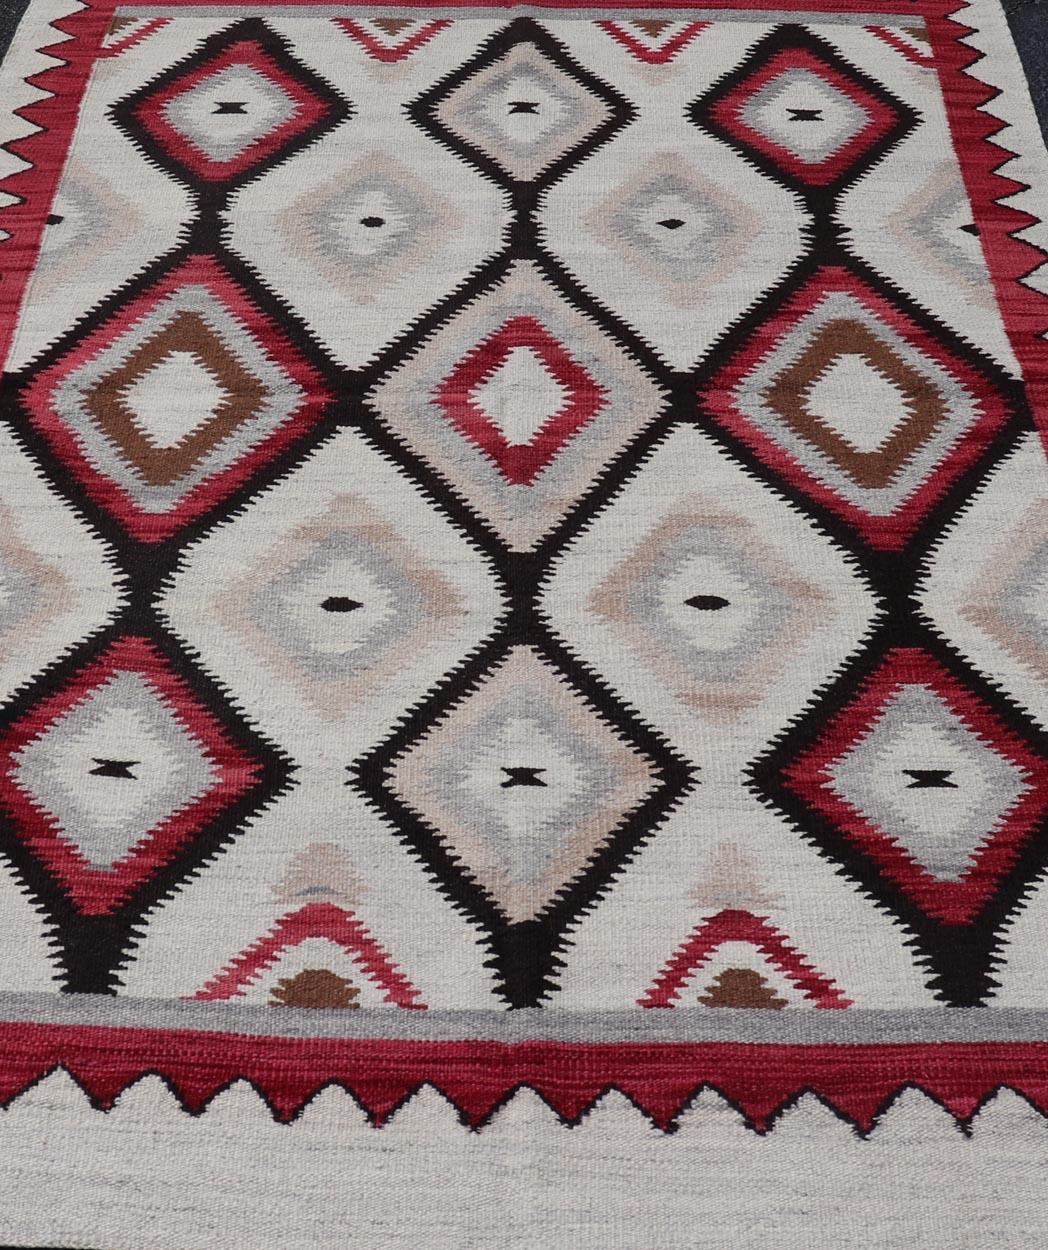 American Navajo Design Rug with Latticework Tribal Design in Red, Black and Gray For Sale 3